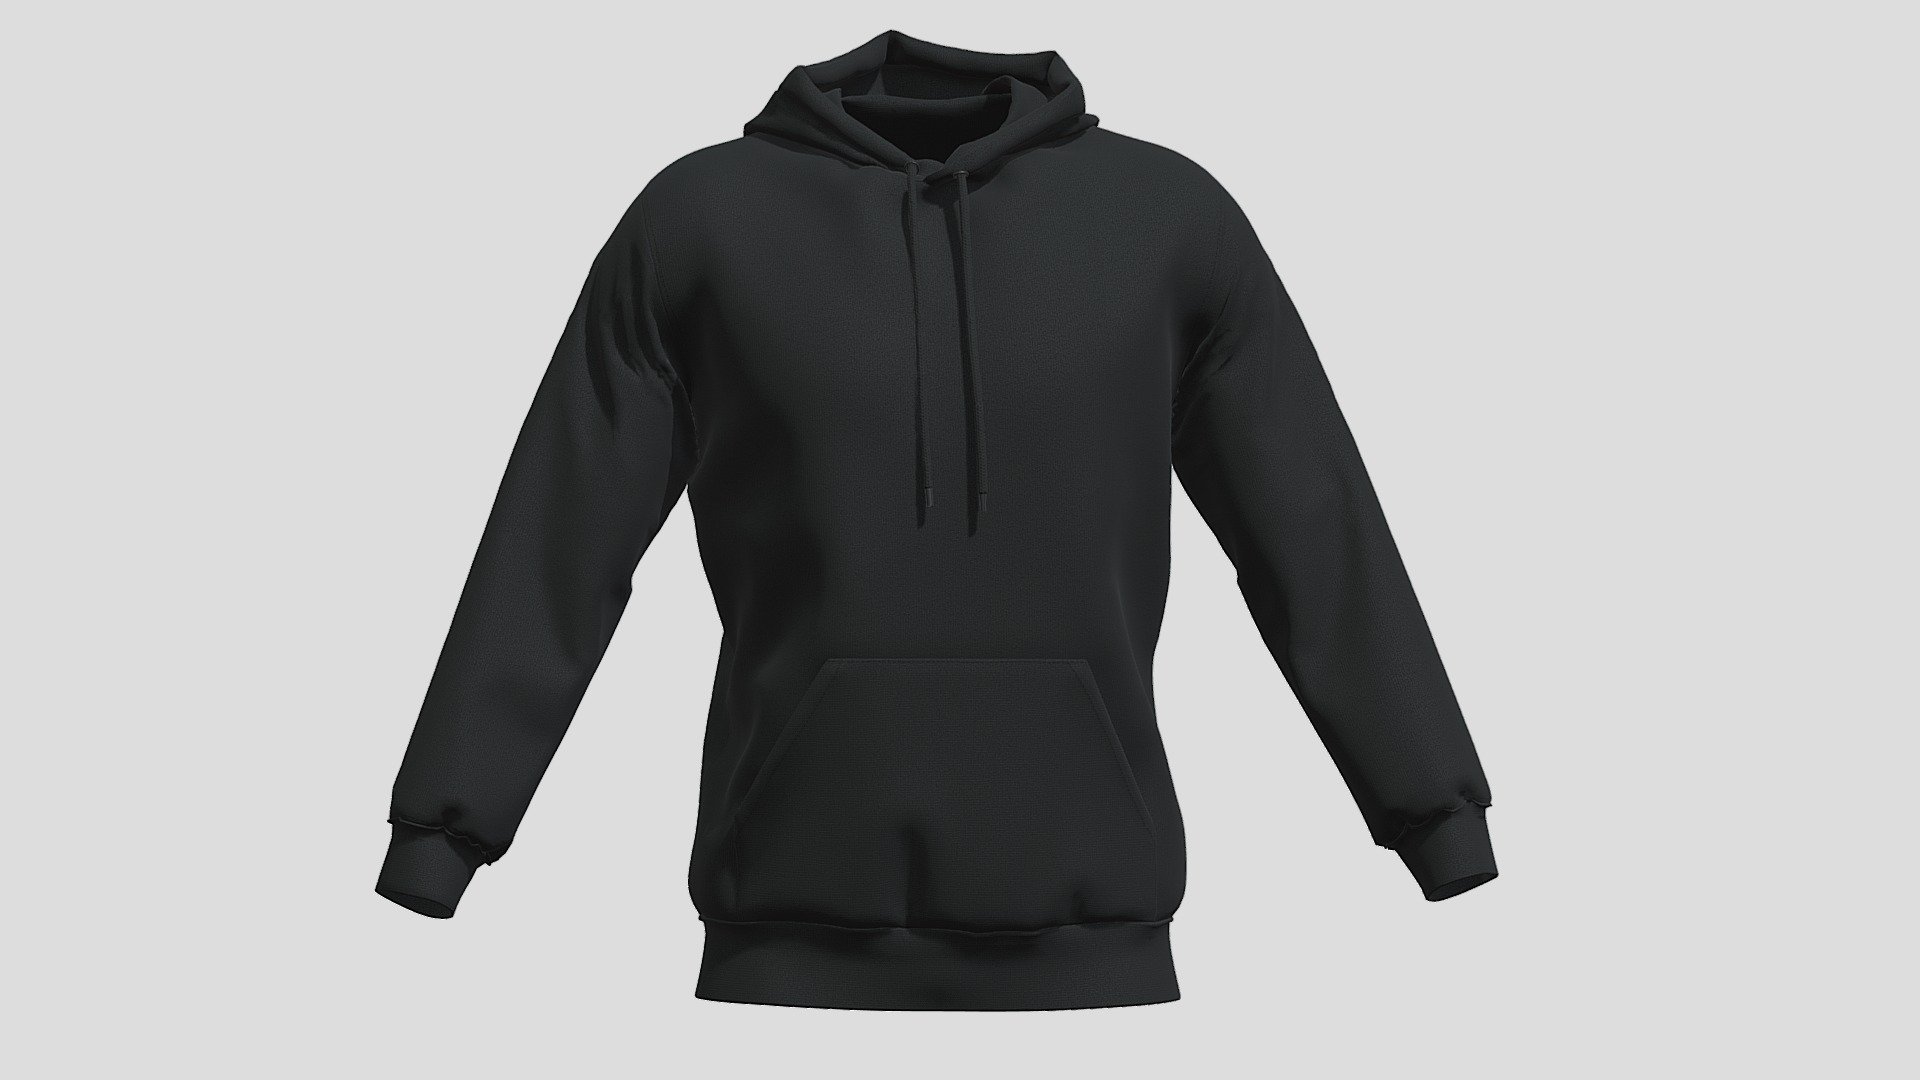 Hi, I'm Frezzy. I am leader of Cgivn studio. We are a team of talented artists working together since 2013.
If you want hire me to do 3d model please touch me at:cgivn.studio Thanks you! - Hoodie Black PBR Realistic - Buy Royalty Free 3D model by Frezzy (@frezzy3d) 3d model